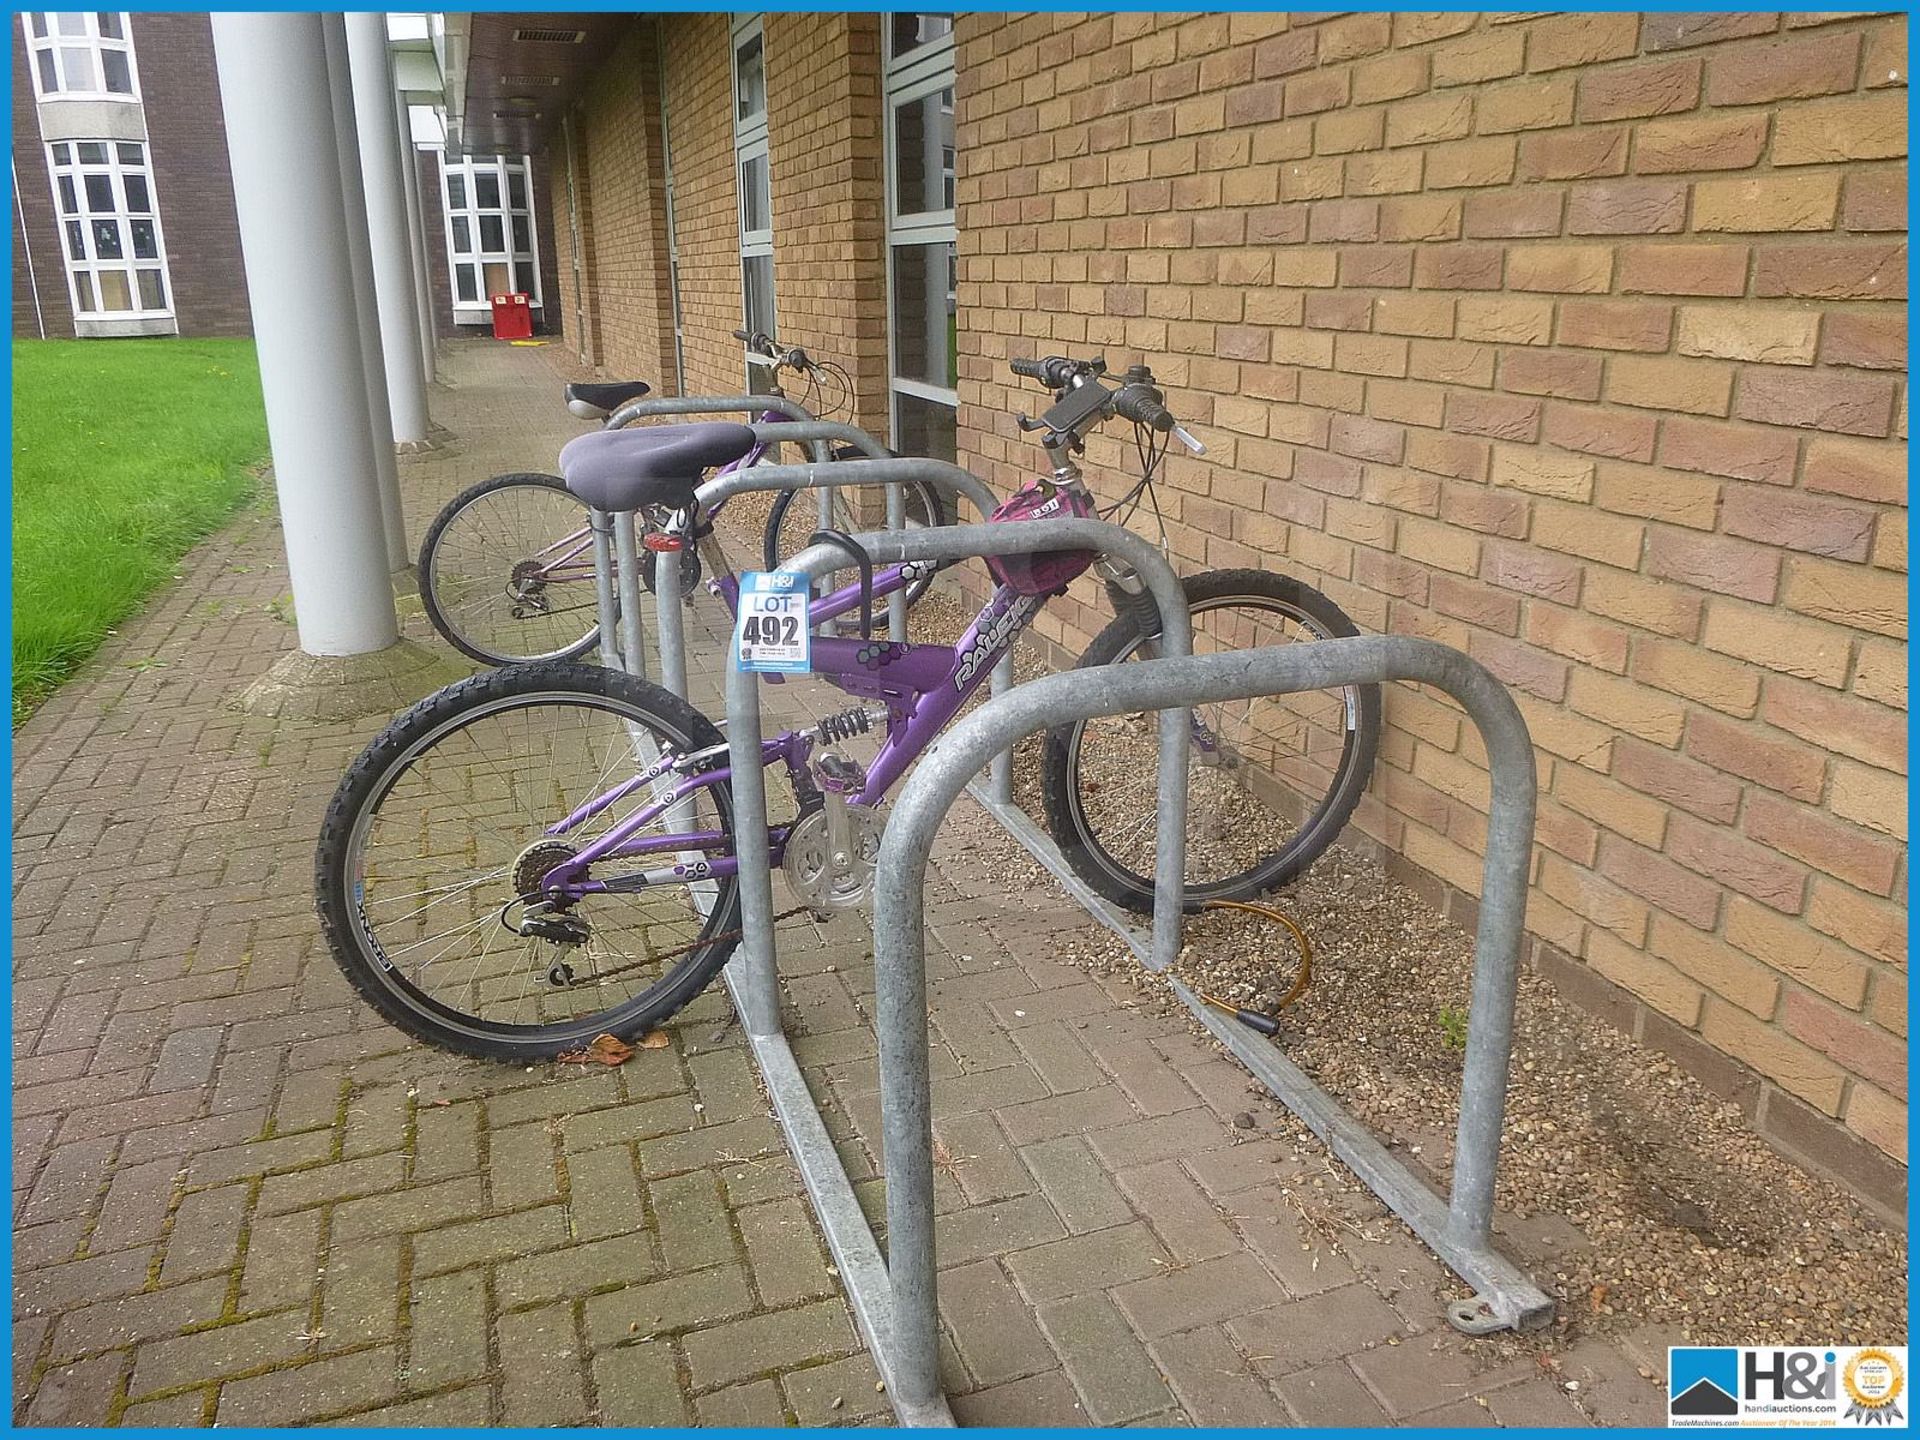 BIKE RACK - 2 BIKES NOT INCLUDED!! BUYER TO UNBOLT AND REMOVE